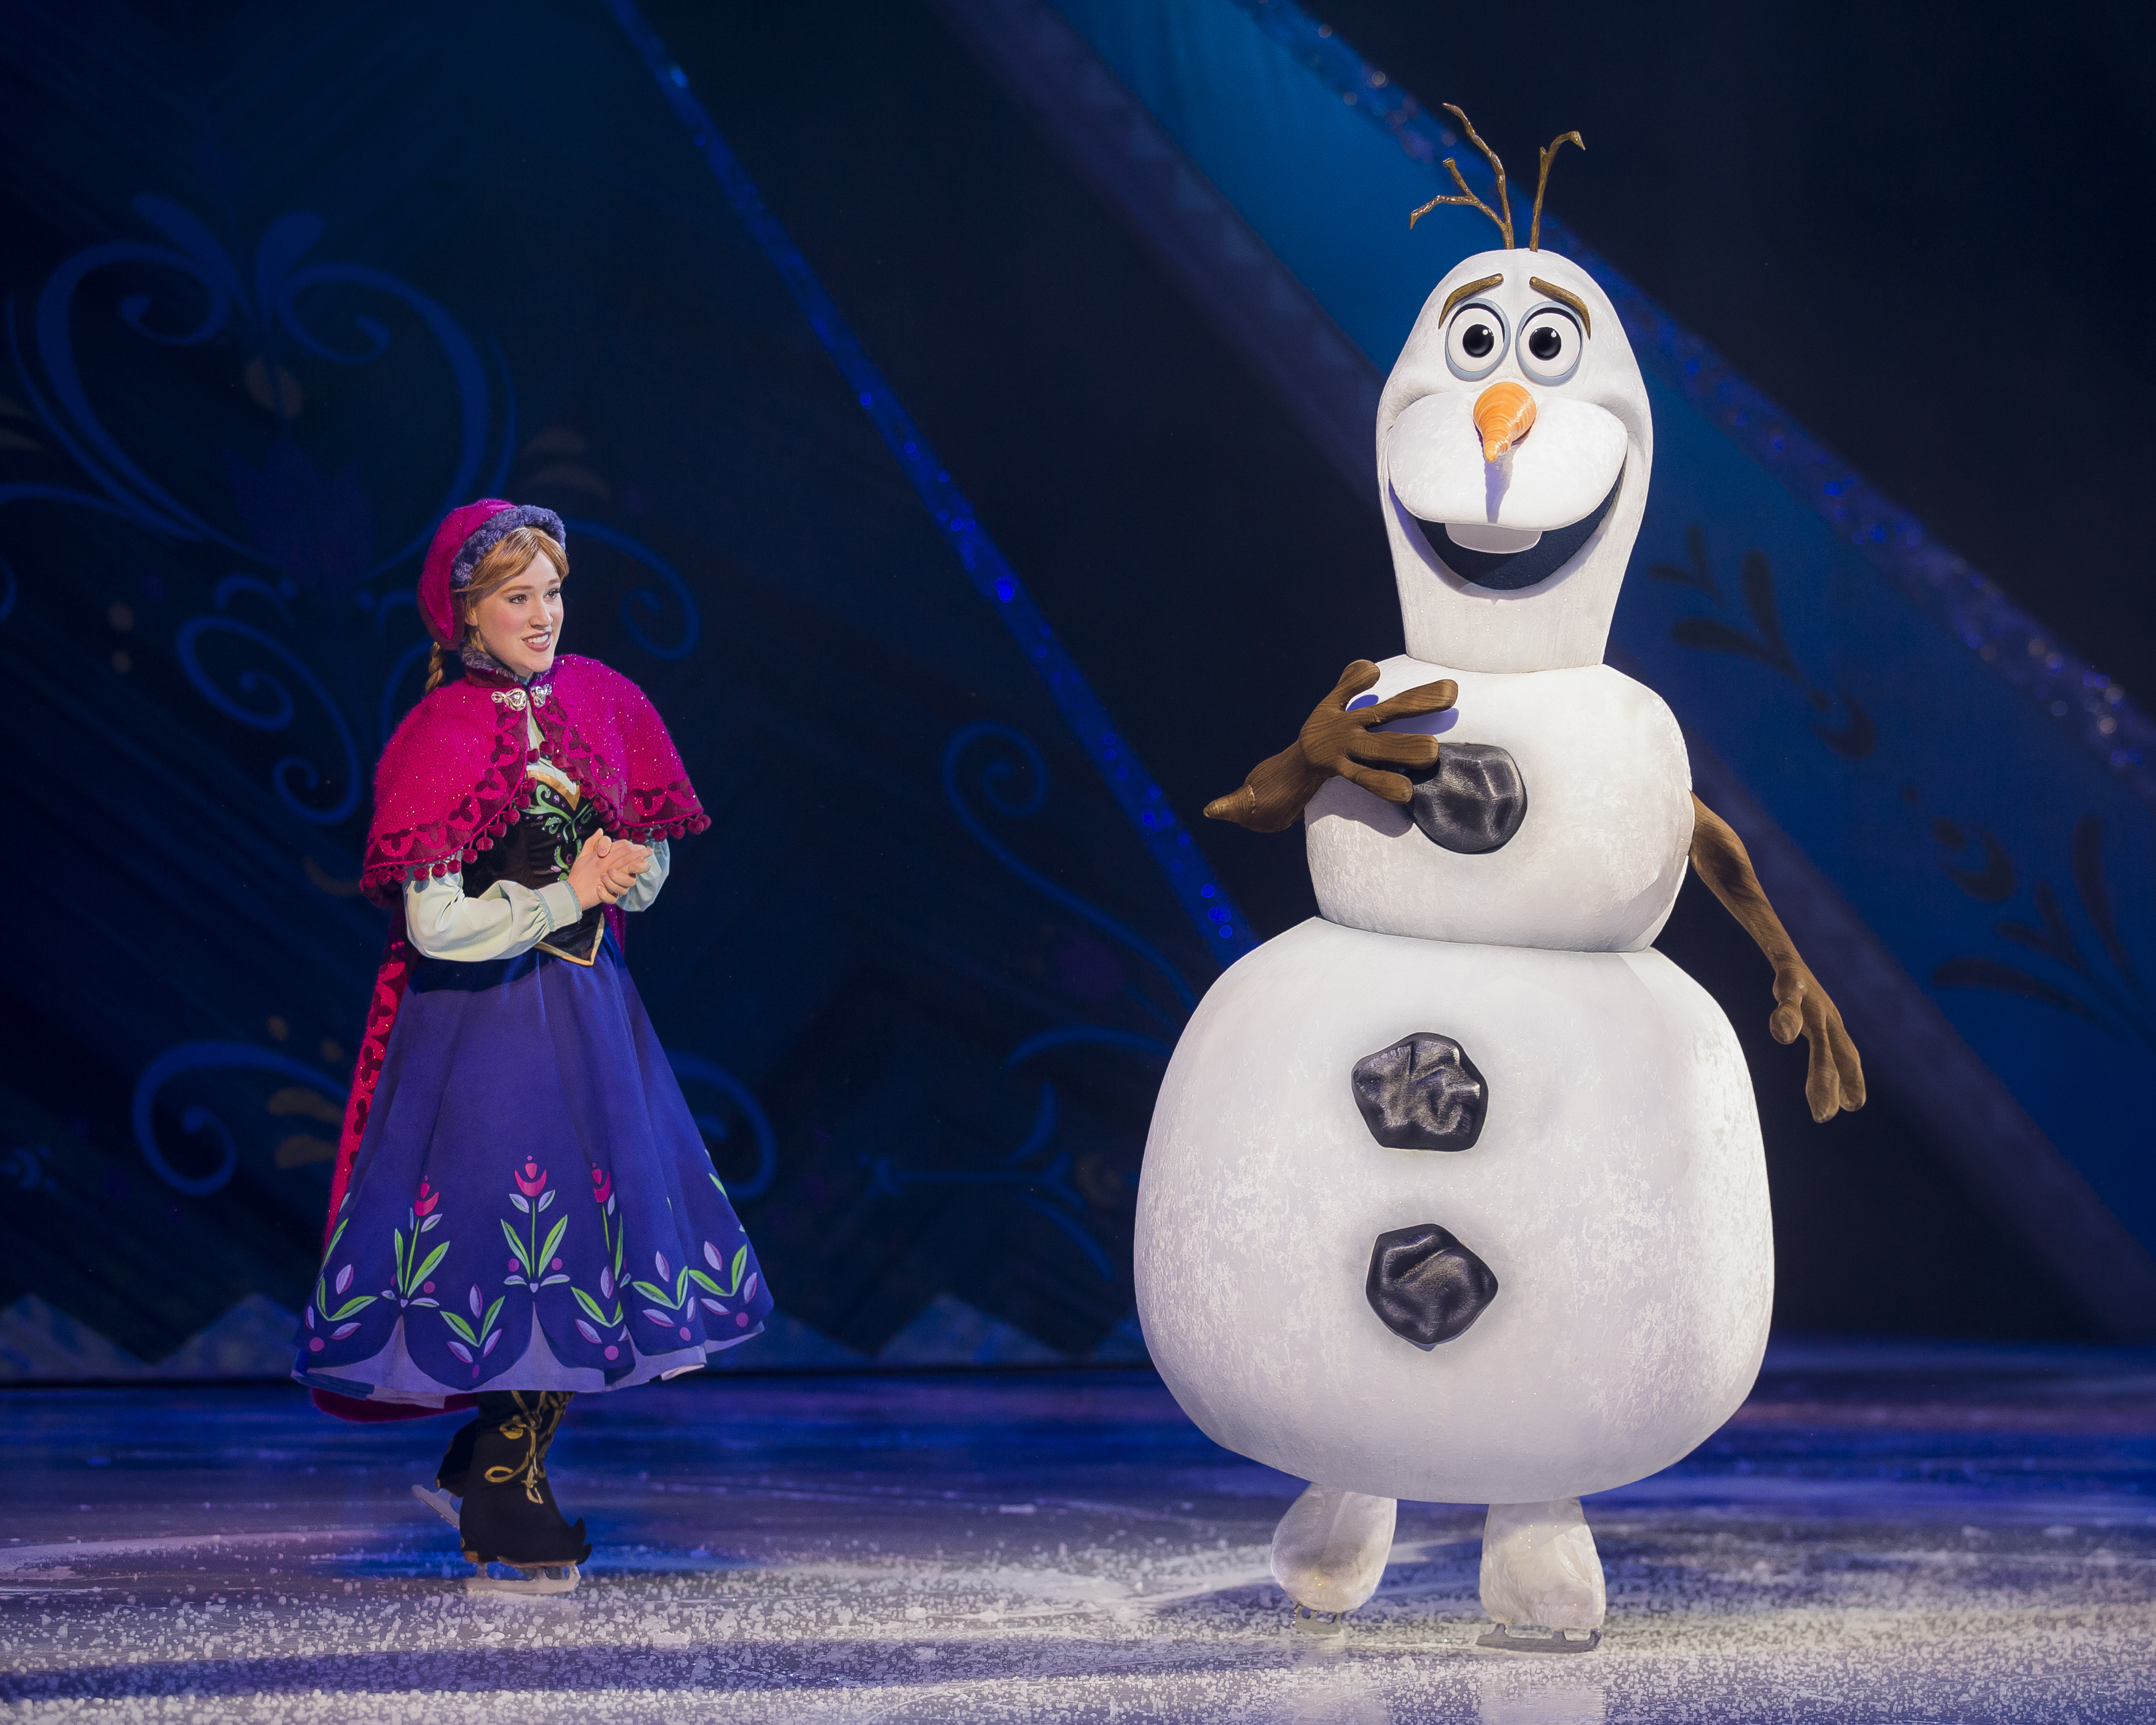 Anna and Olaf in 'Disney on Ice: Worlds of Enchantment'